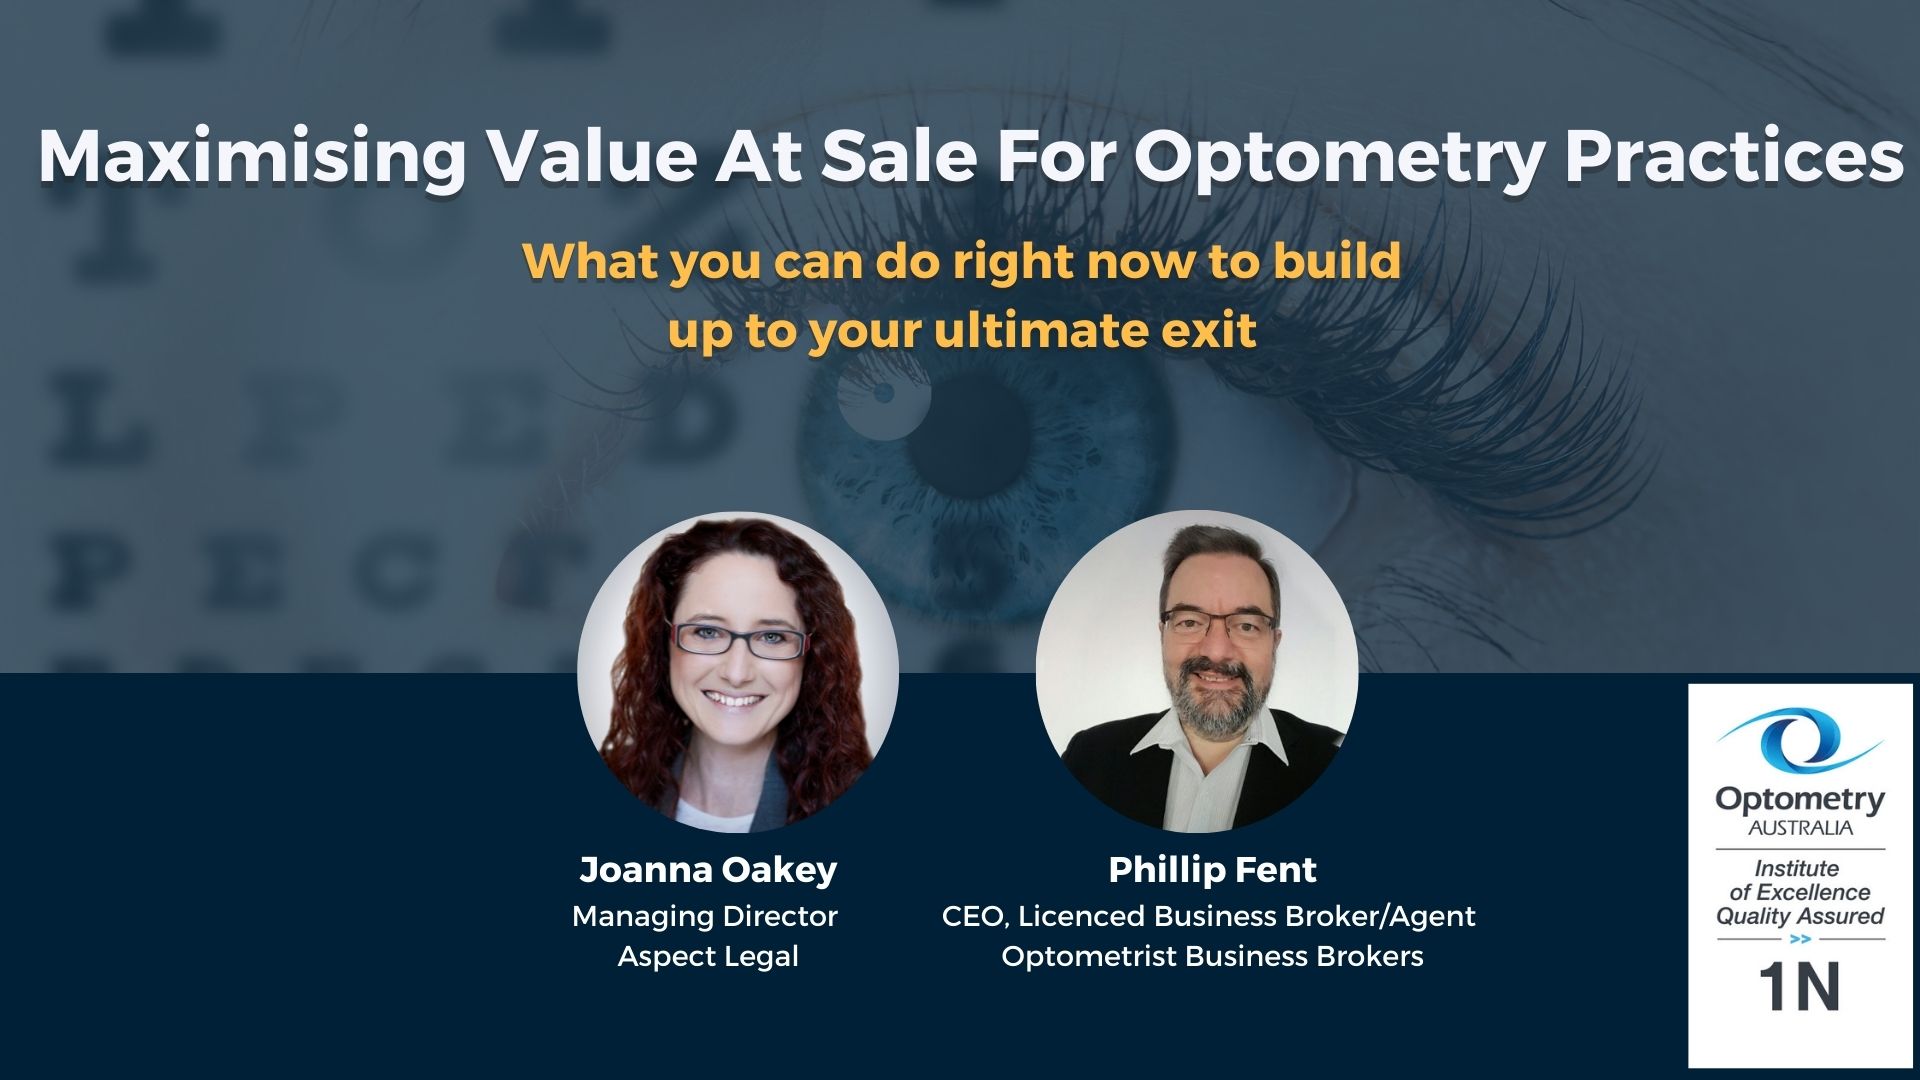 Maximising Value At Sale For Optometry Practices